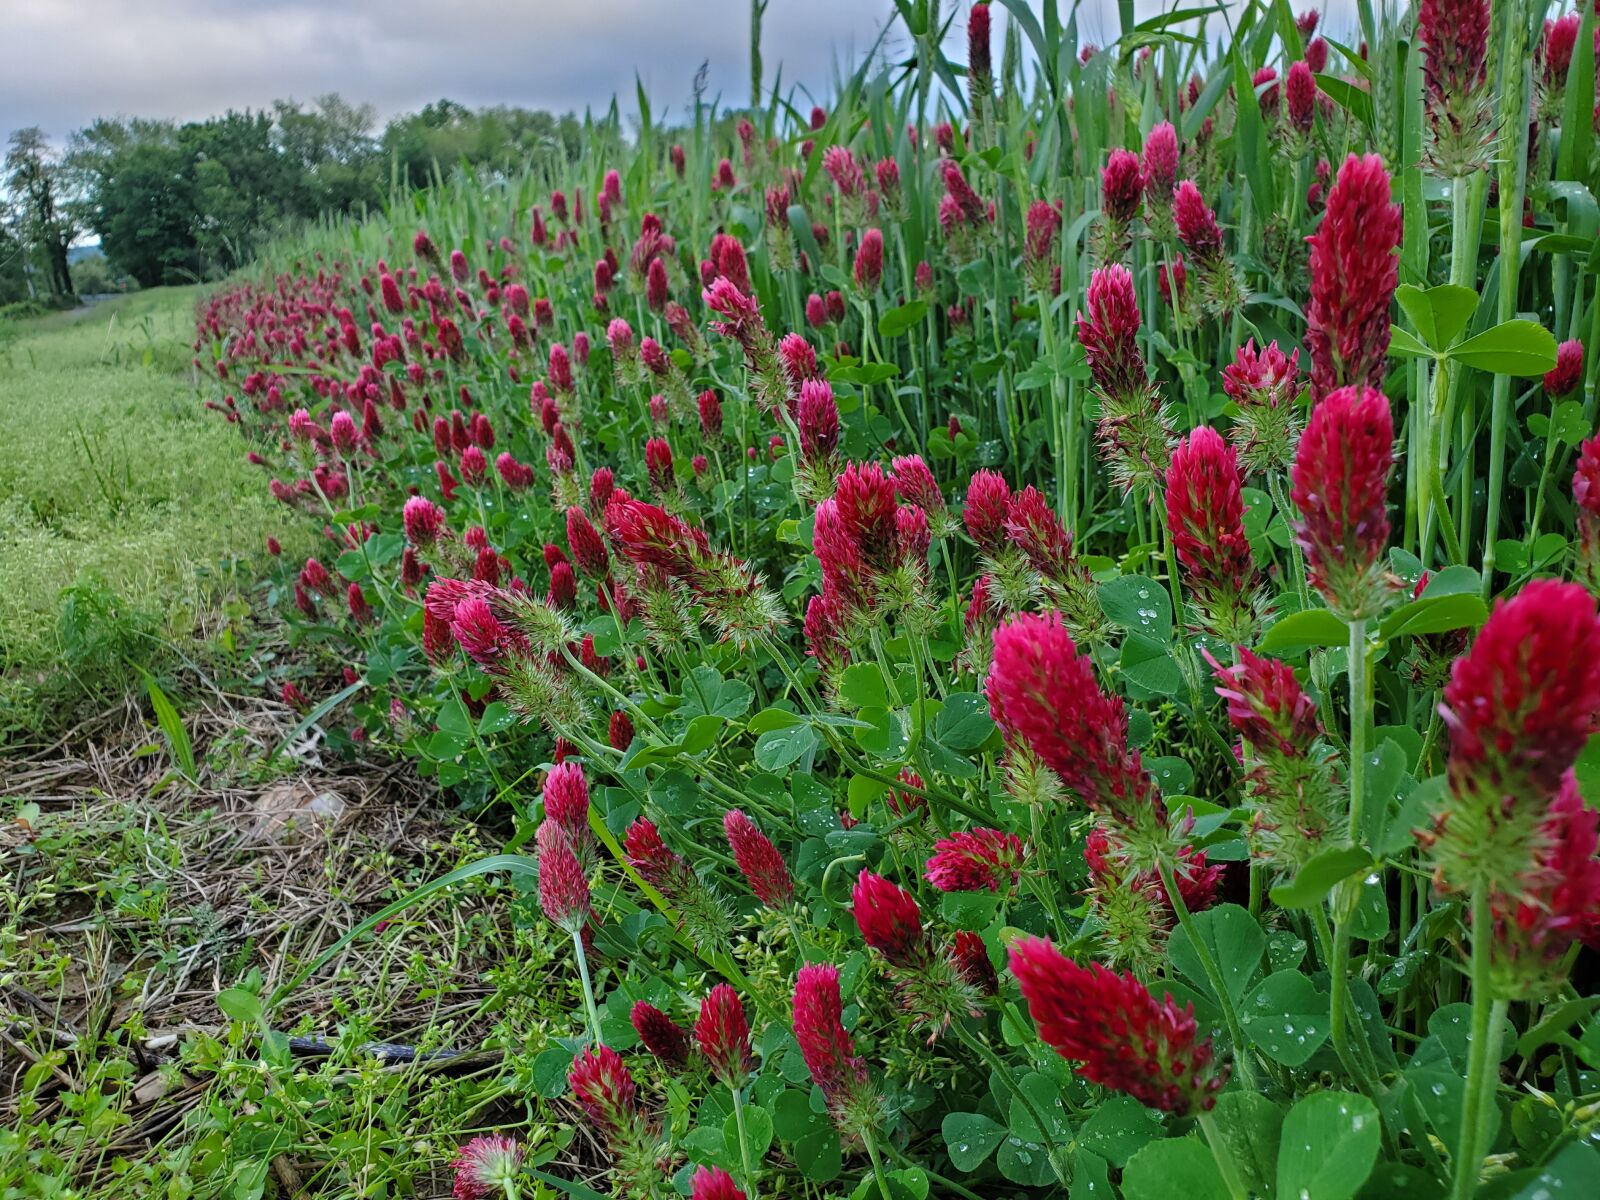 Samsung Galaxy S10 sample photo. Clover field, nature, clover photography